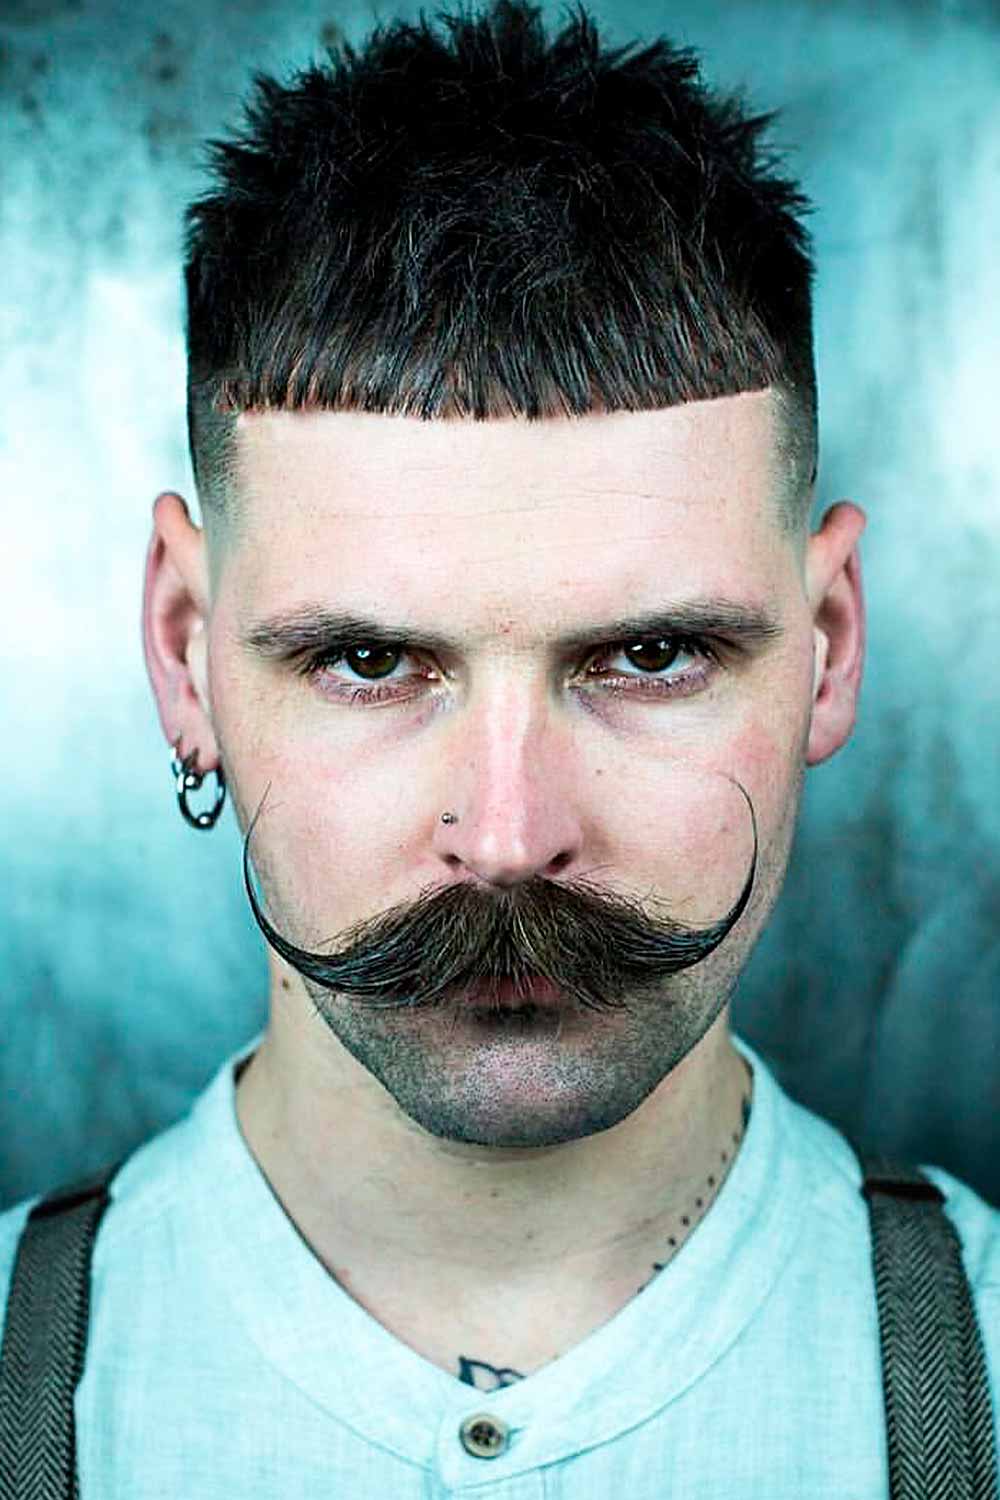 Handlebar Mustache #mustache #moustache #mustachestyles #mustaches